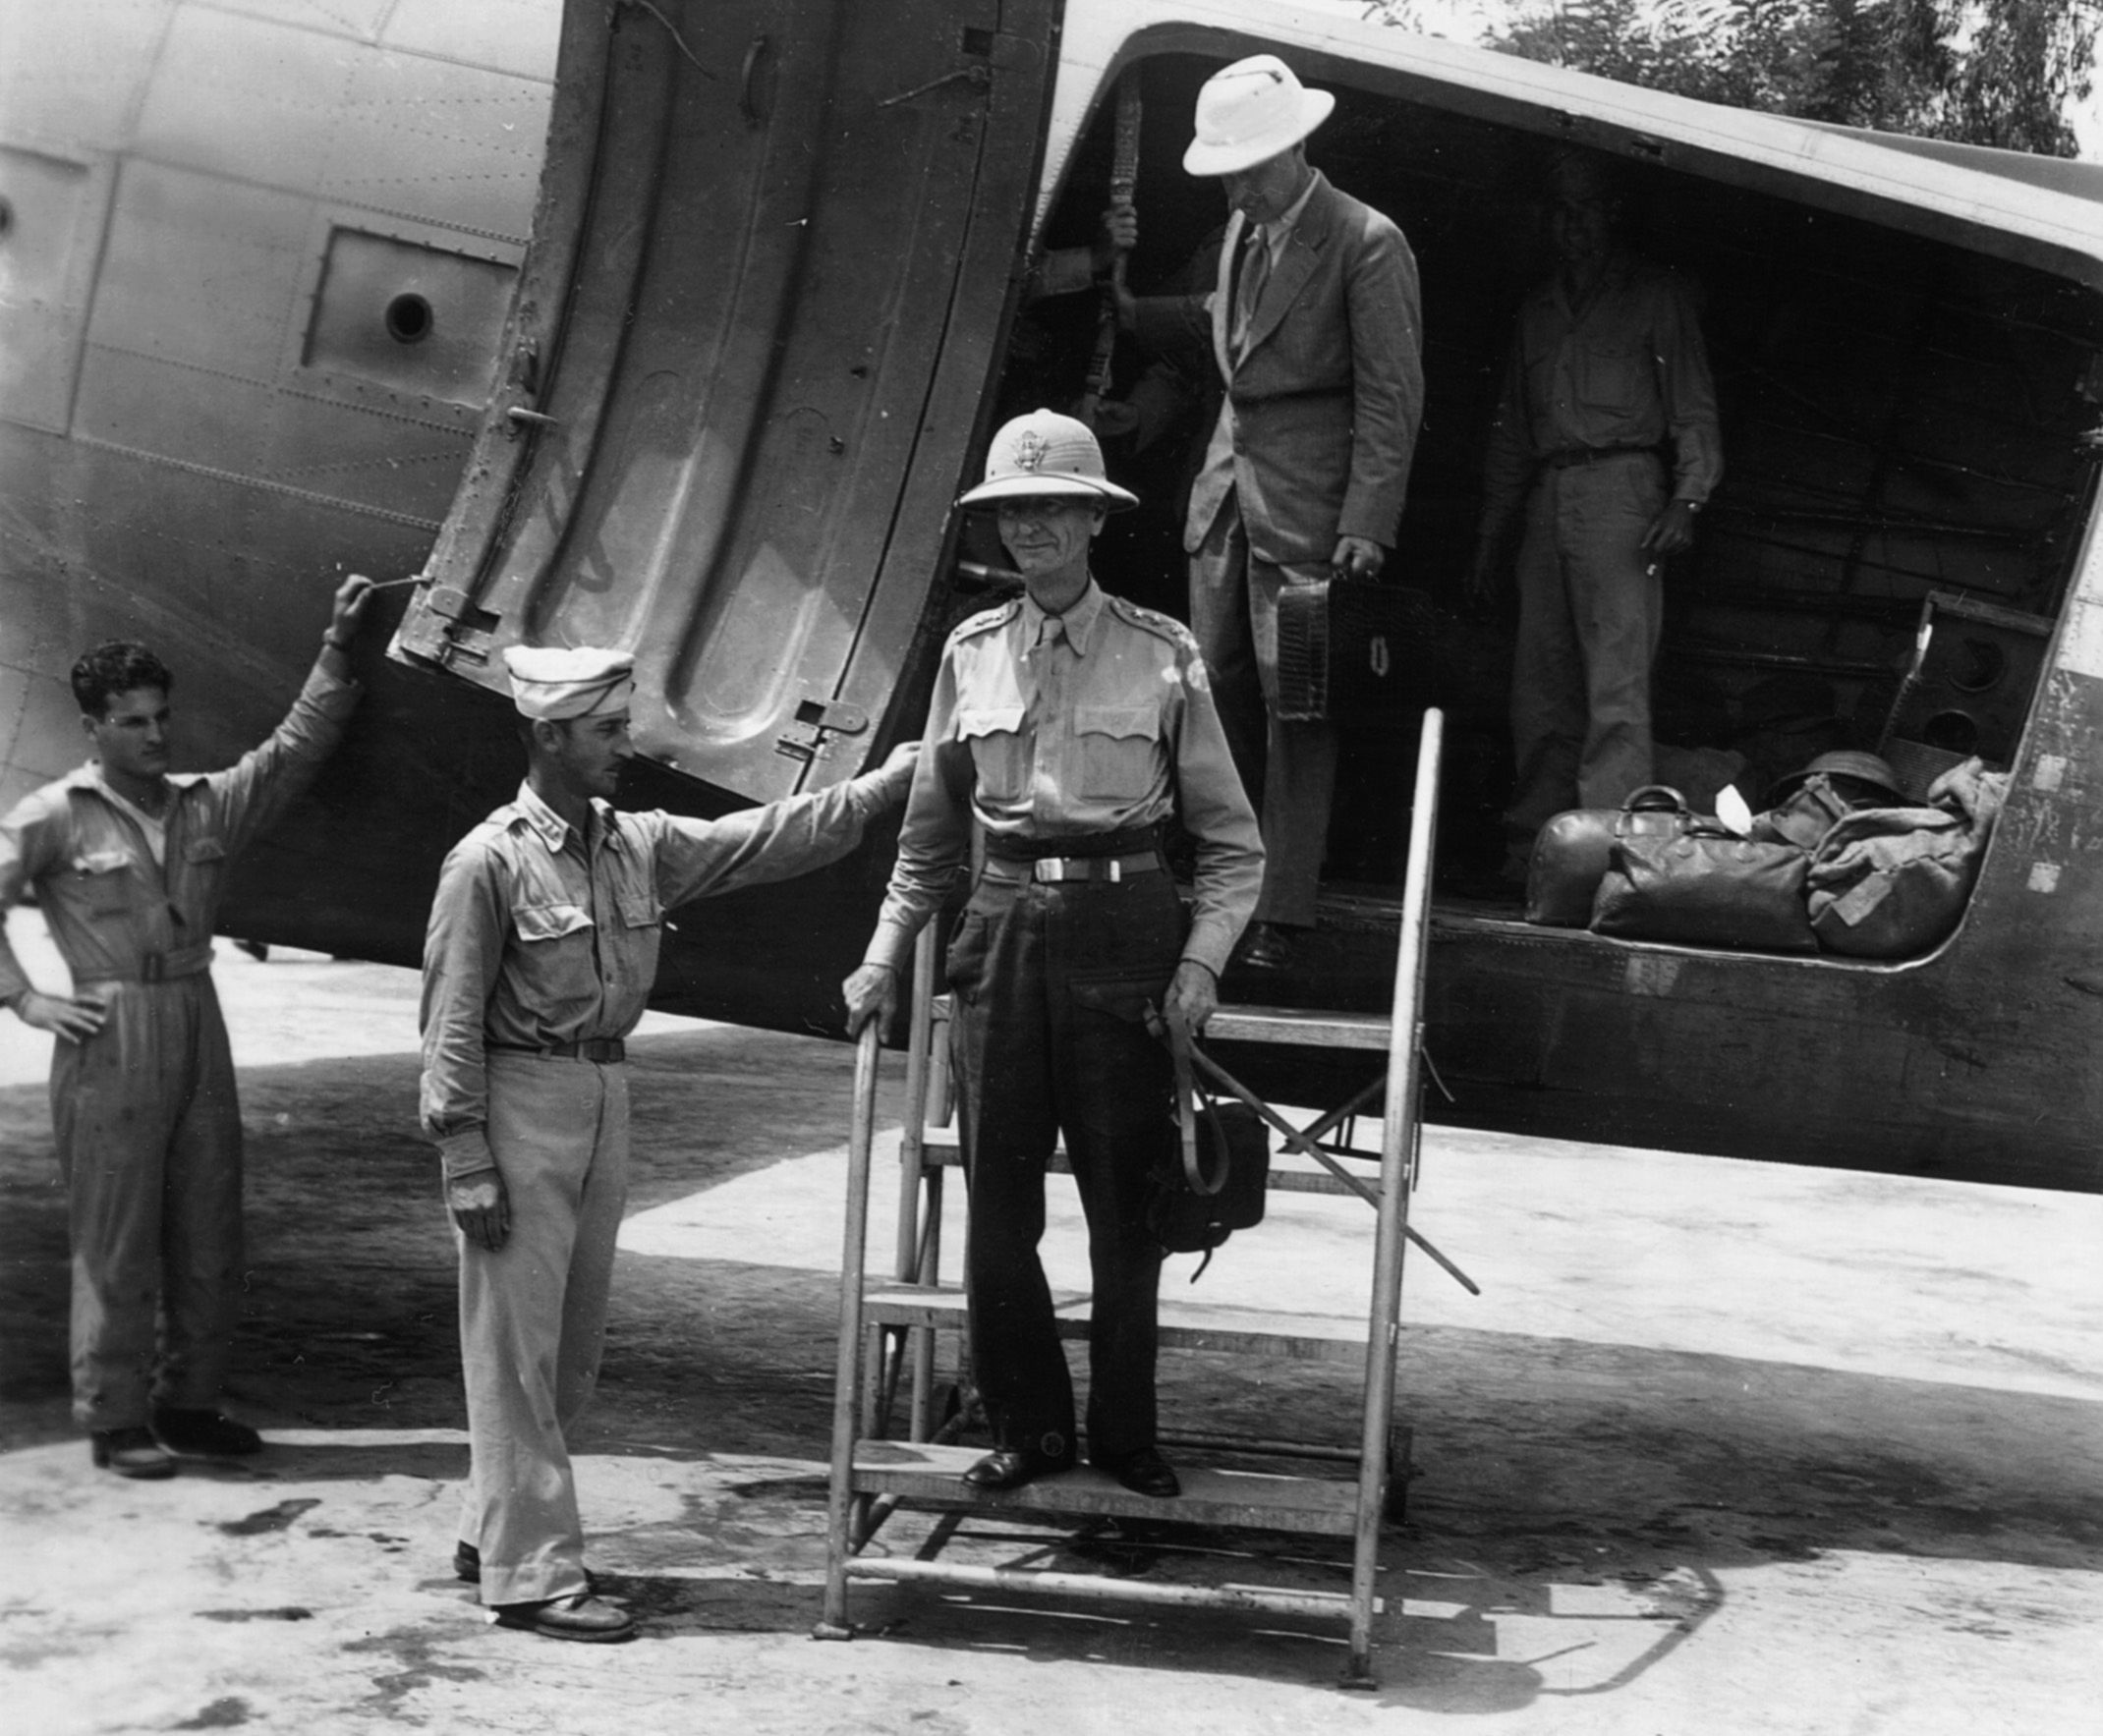 On August 28, 1945, General Jonathan Wainwright steps down from a C-47 transport in Chunking, China, after three arduous years in a Japanese prison camp.